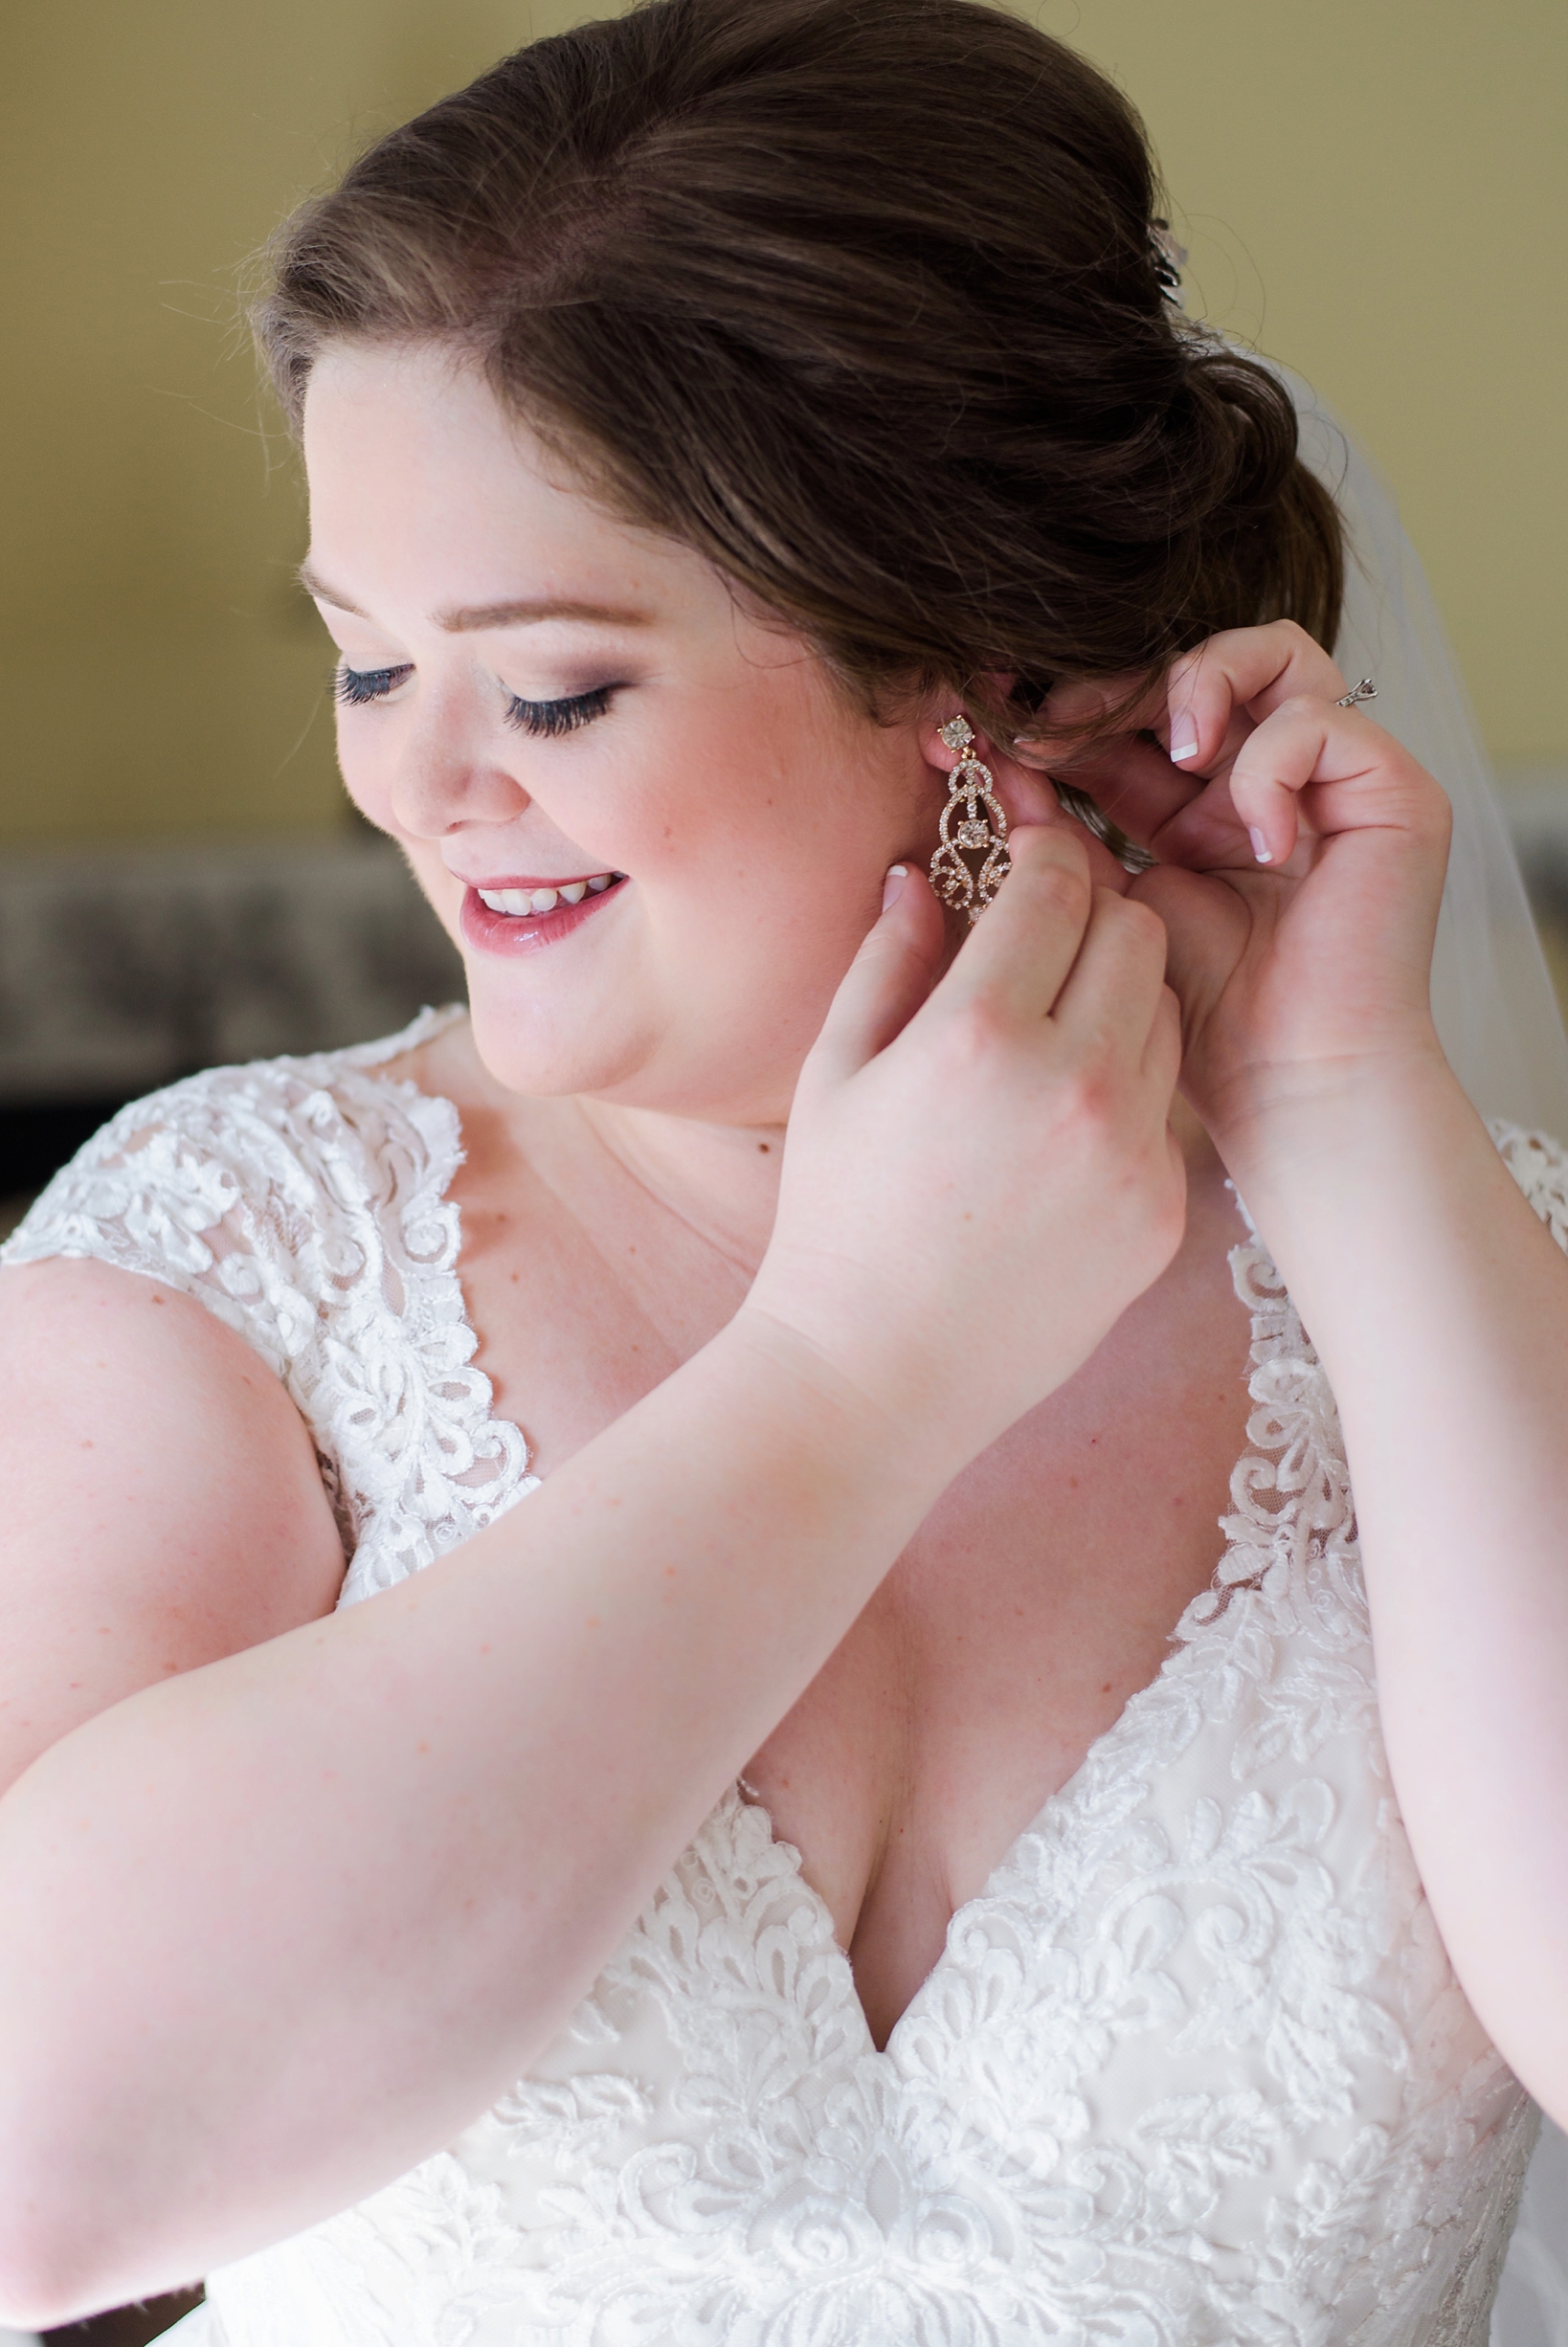 The bride in her lace trimmed wedding dress putting her earrings in